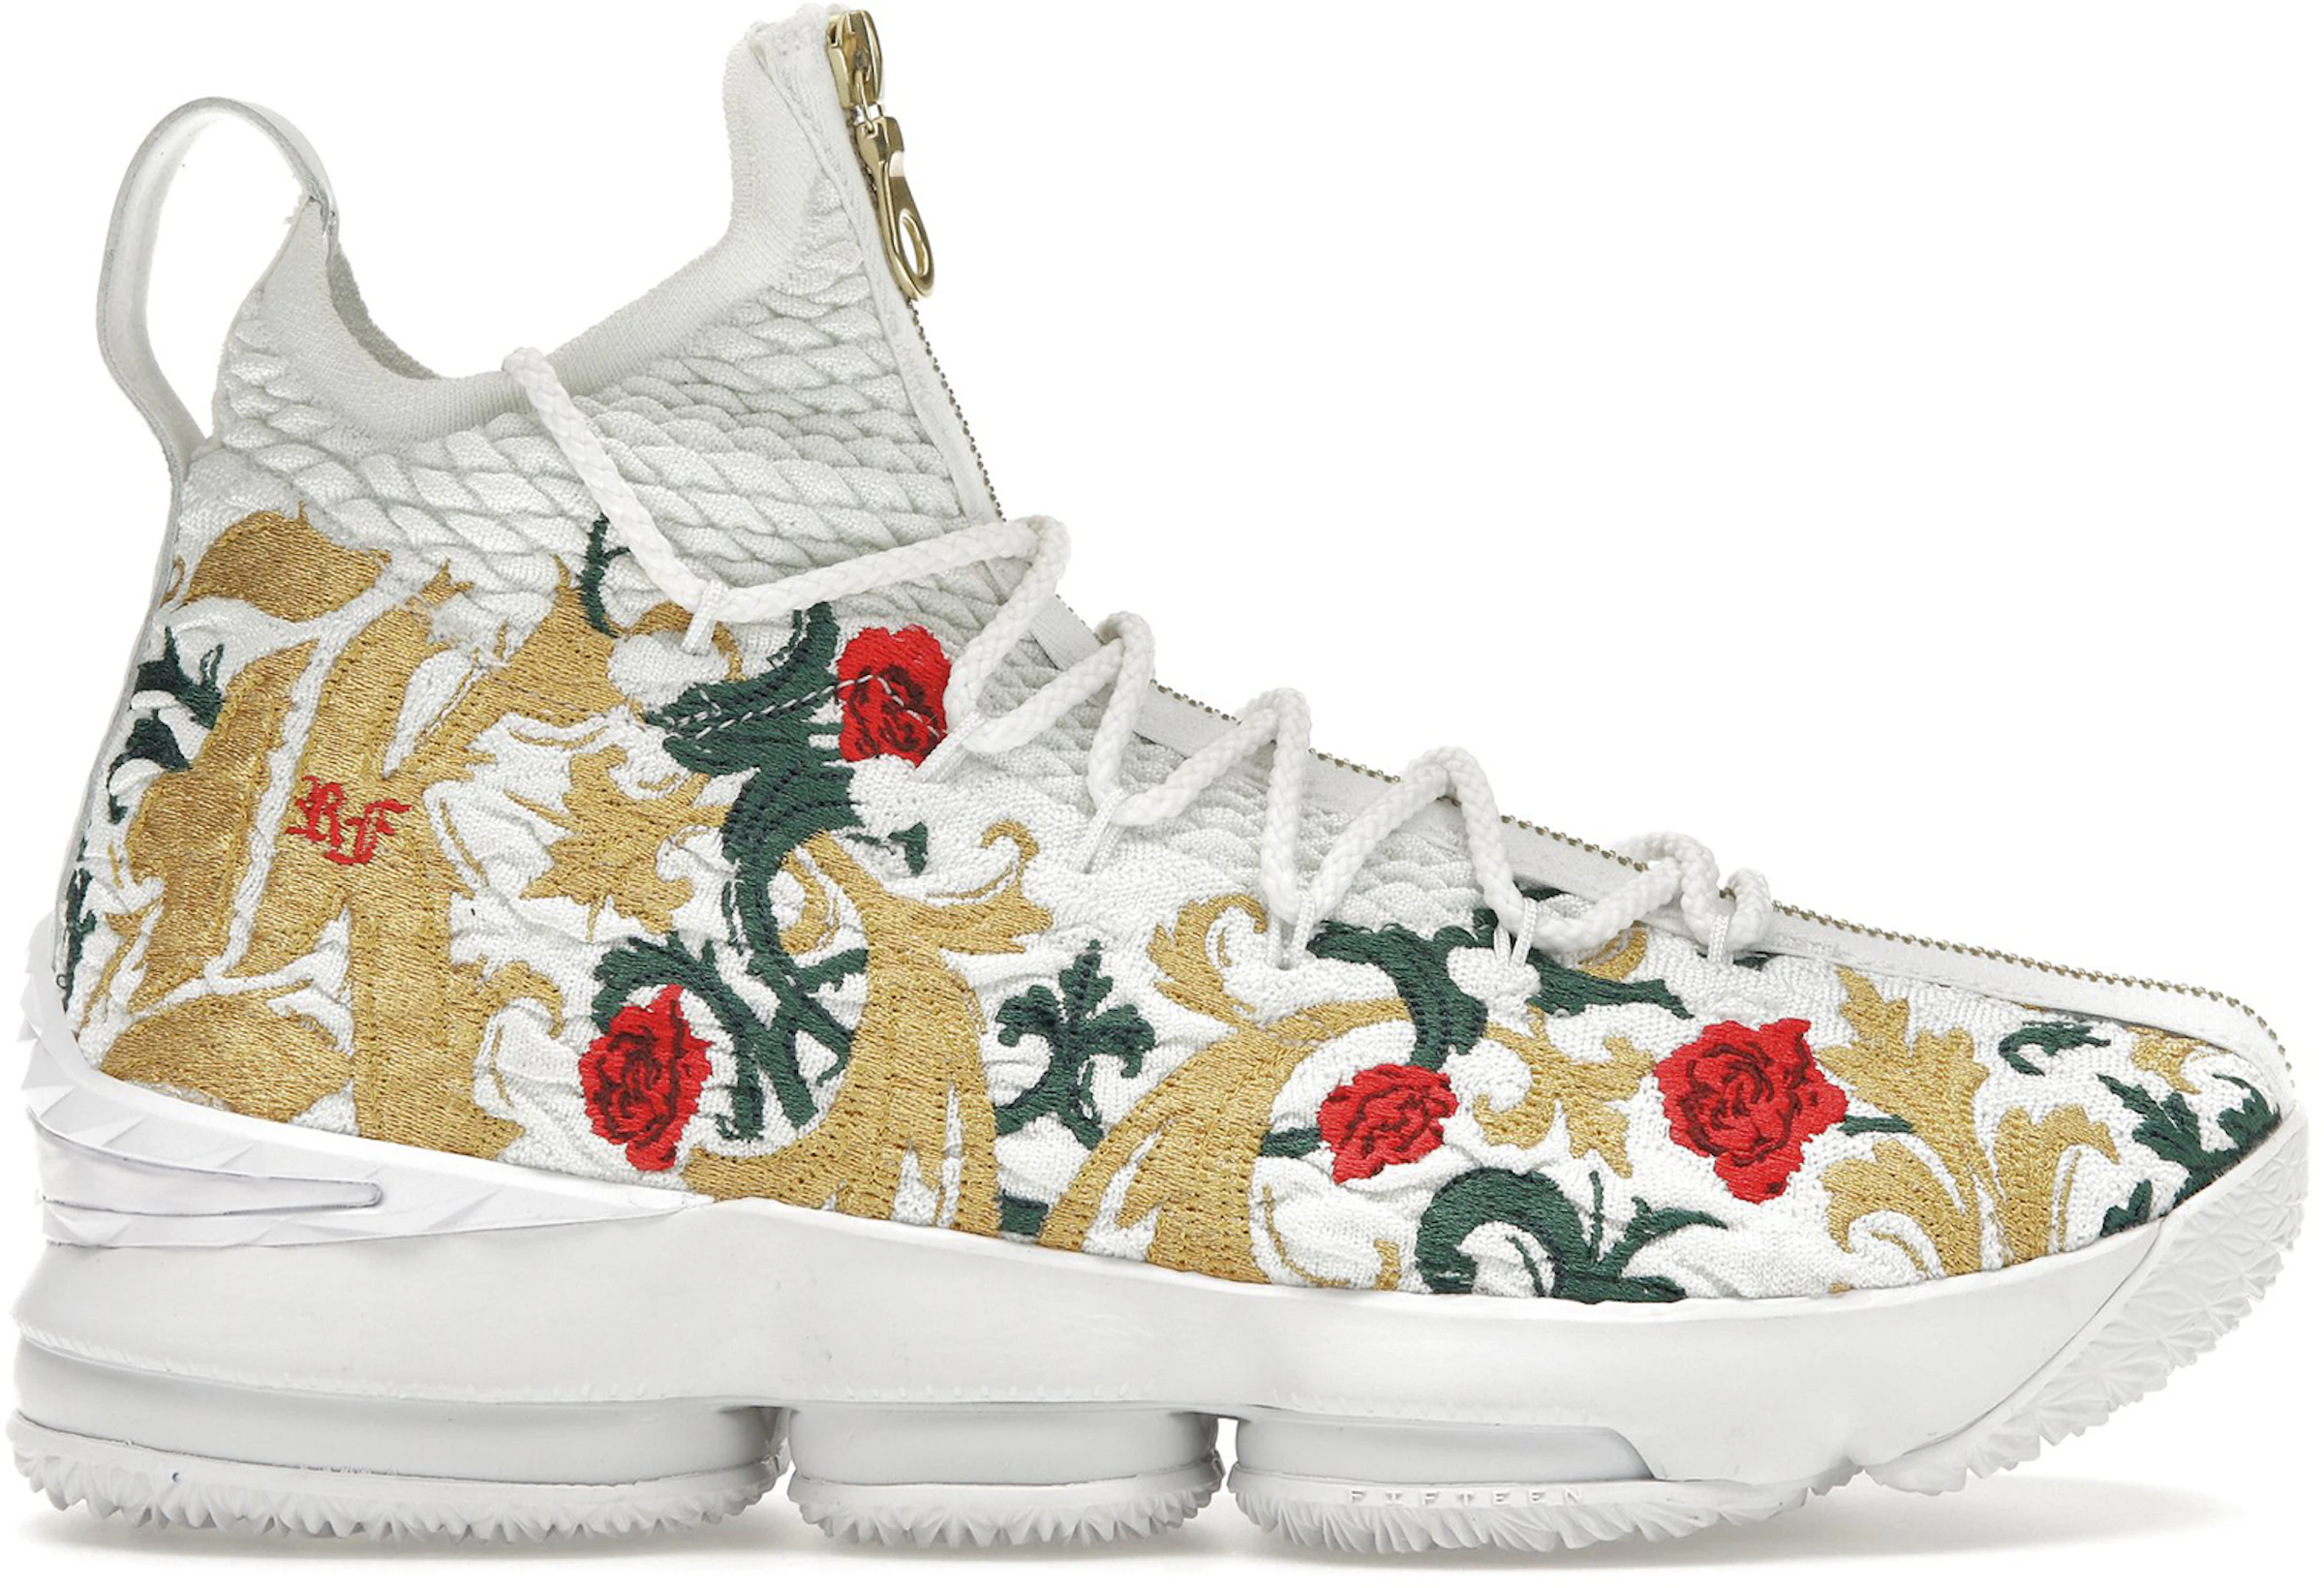 Lebron 15 Kith Collection | atelier-yuwa.ciao.jp